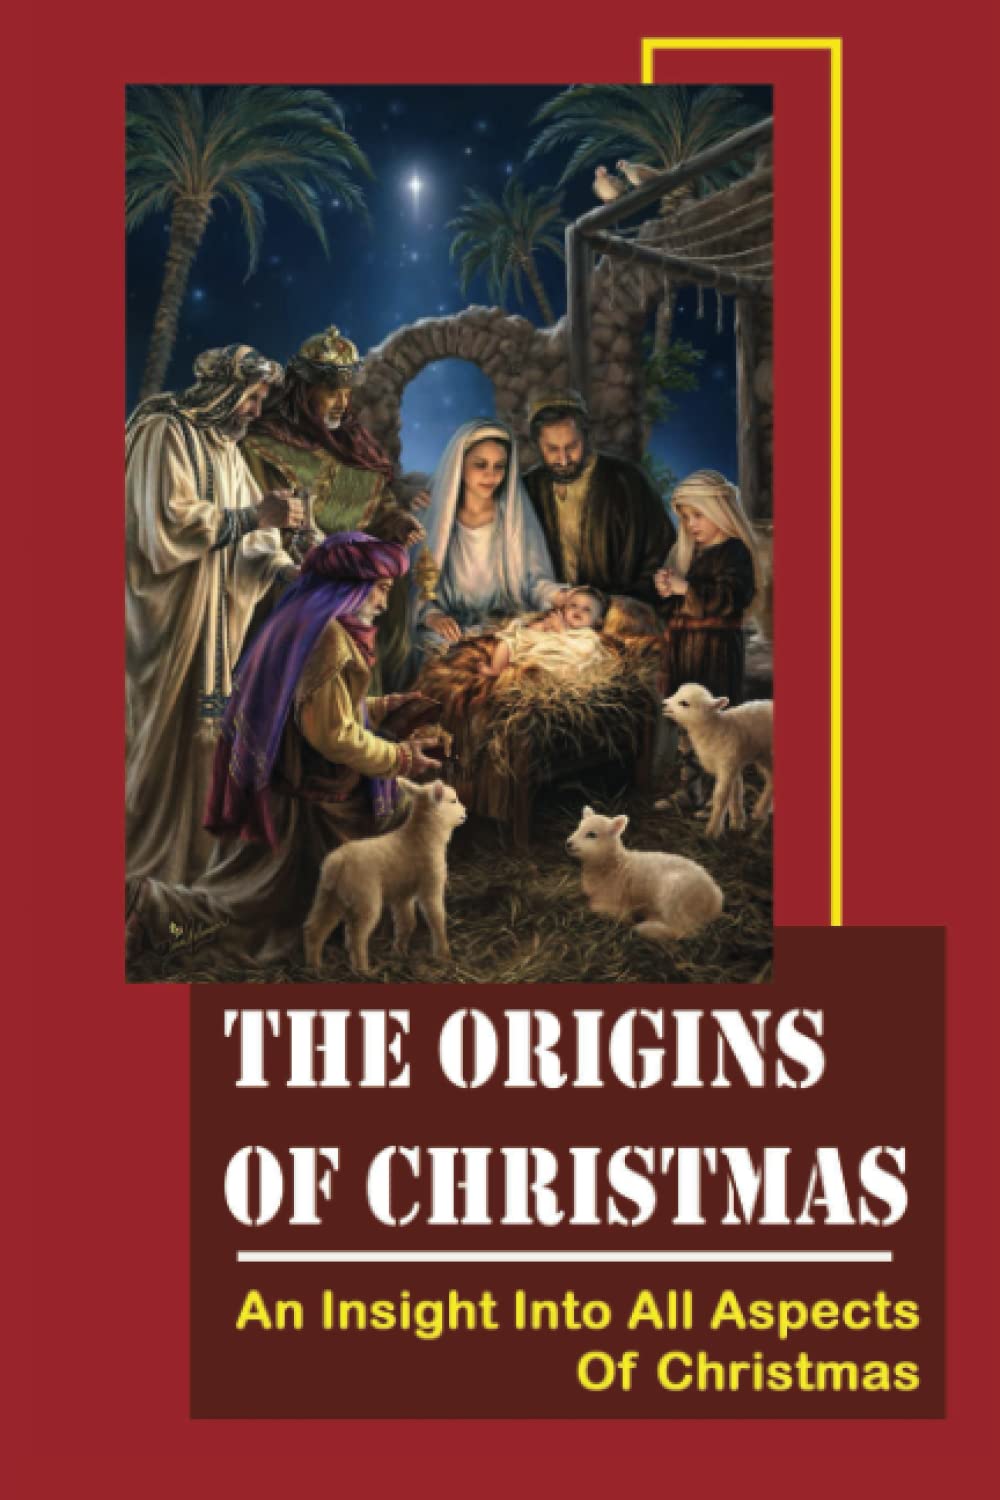 The Origins Of Christmas: An Insight Into All Aspects Of Christmas